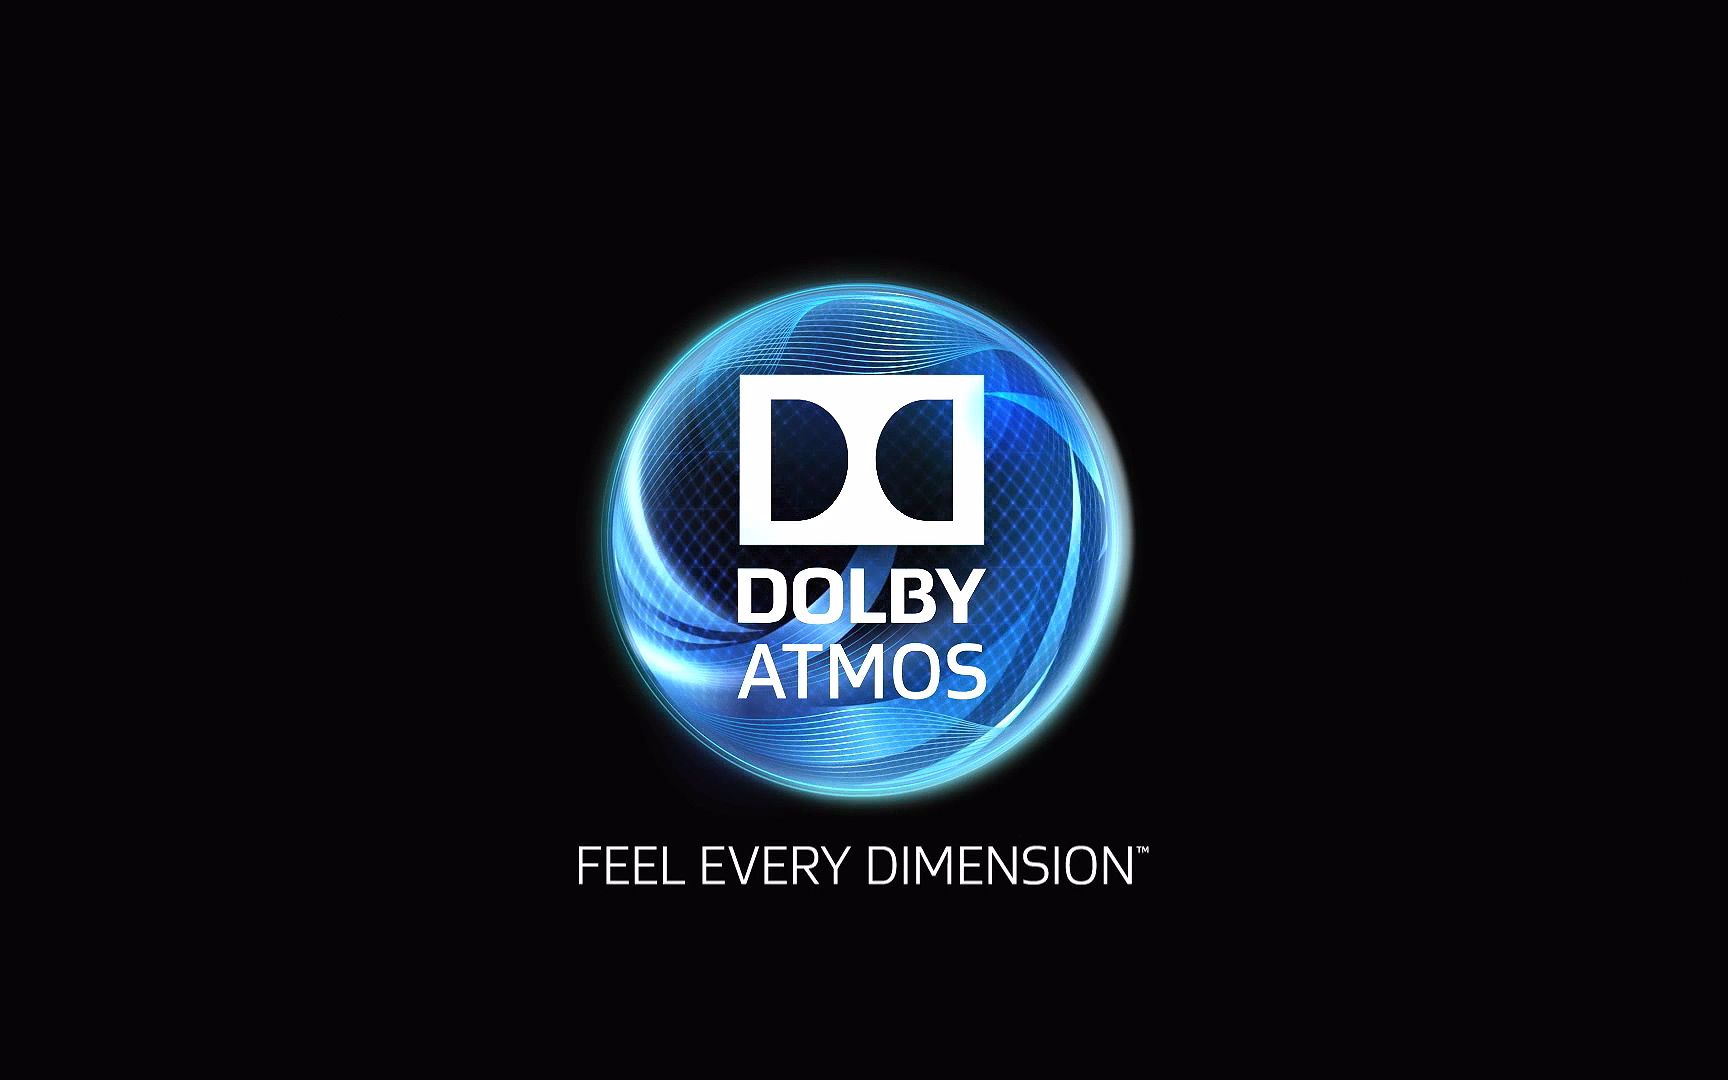 dolby atmos demo disk 2015 torrent